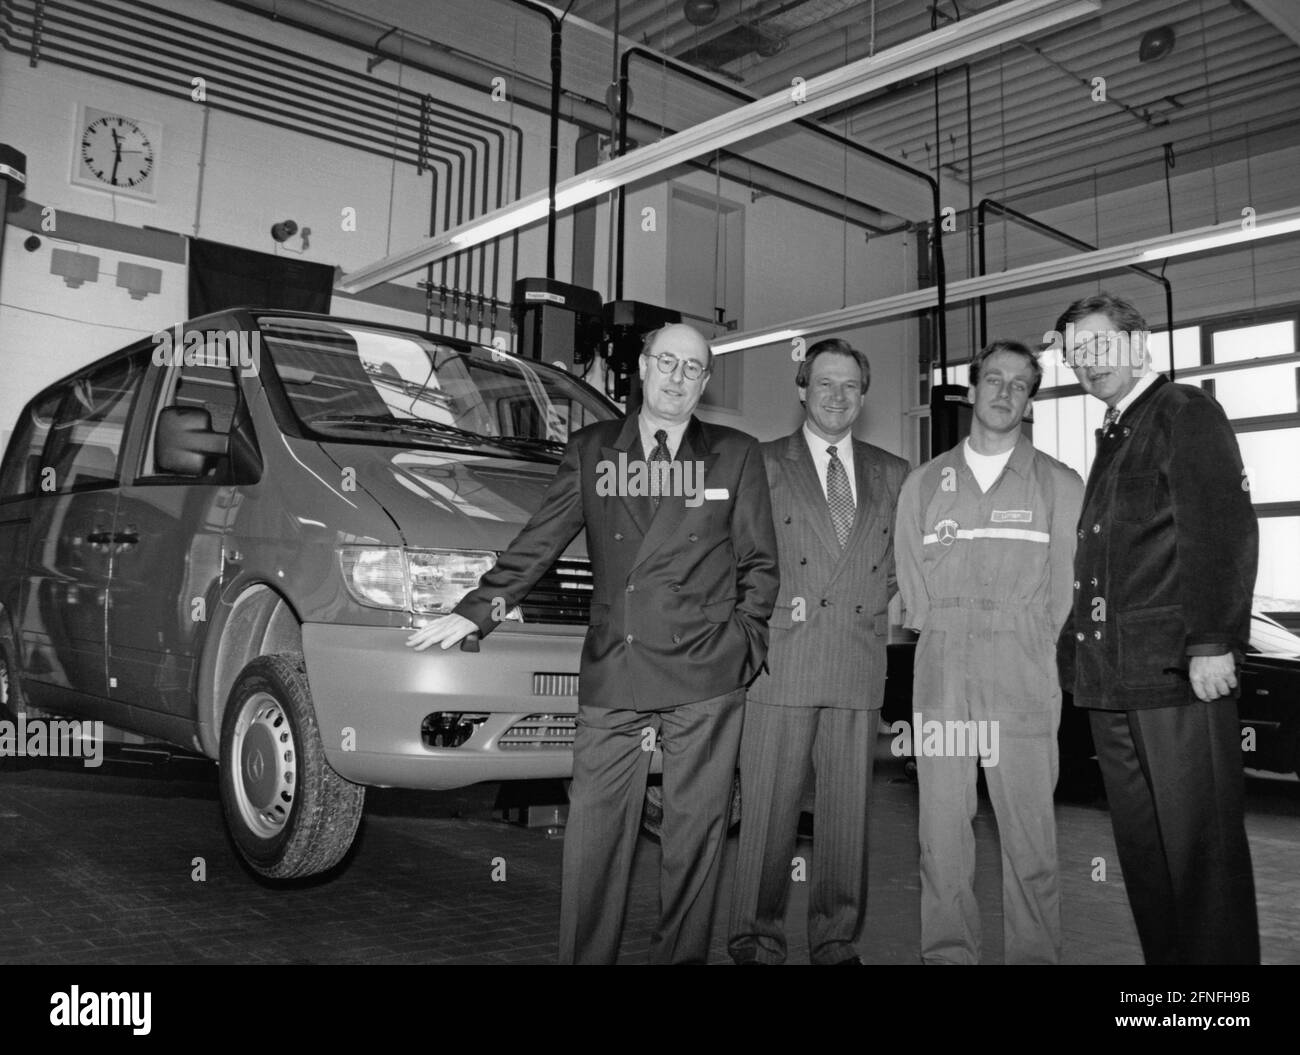 'The ''Vito'' compact van is presented at the Mercedes- Benz Service Centre in Neuperlach. From left to right: Branch Manager Wolfgang Schrempp, City Councillor Hermann Memmel, fitter Max Leitner and Environment Minister Thomas Goppel. [automated translation]' Stock Photo